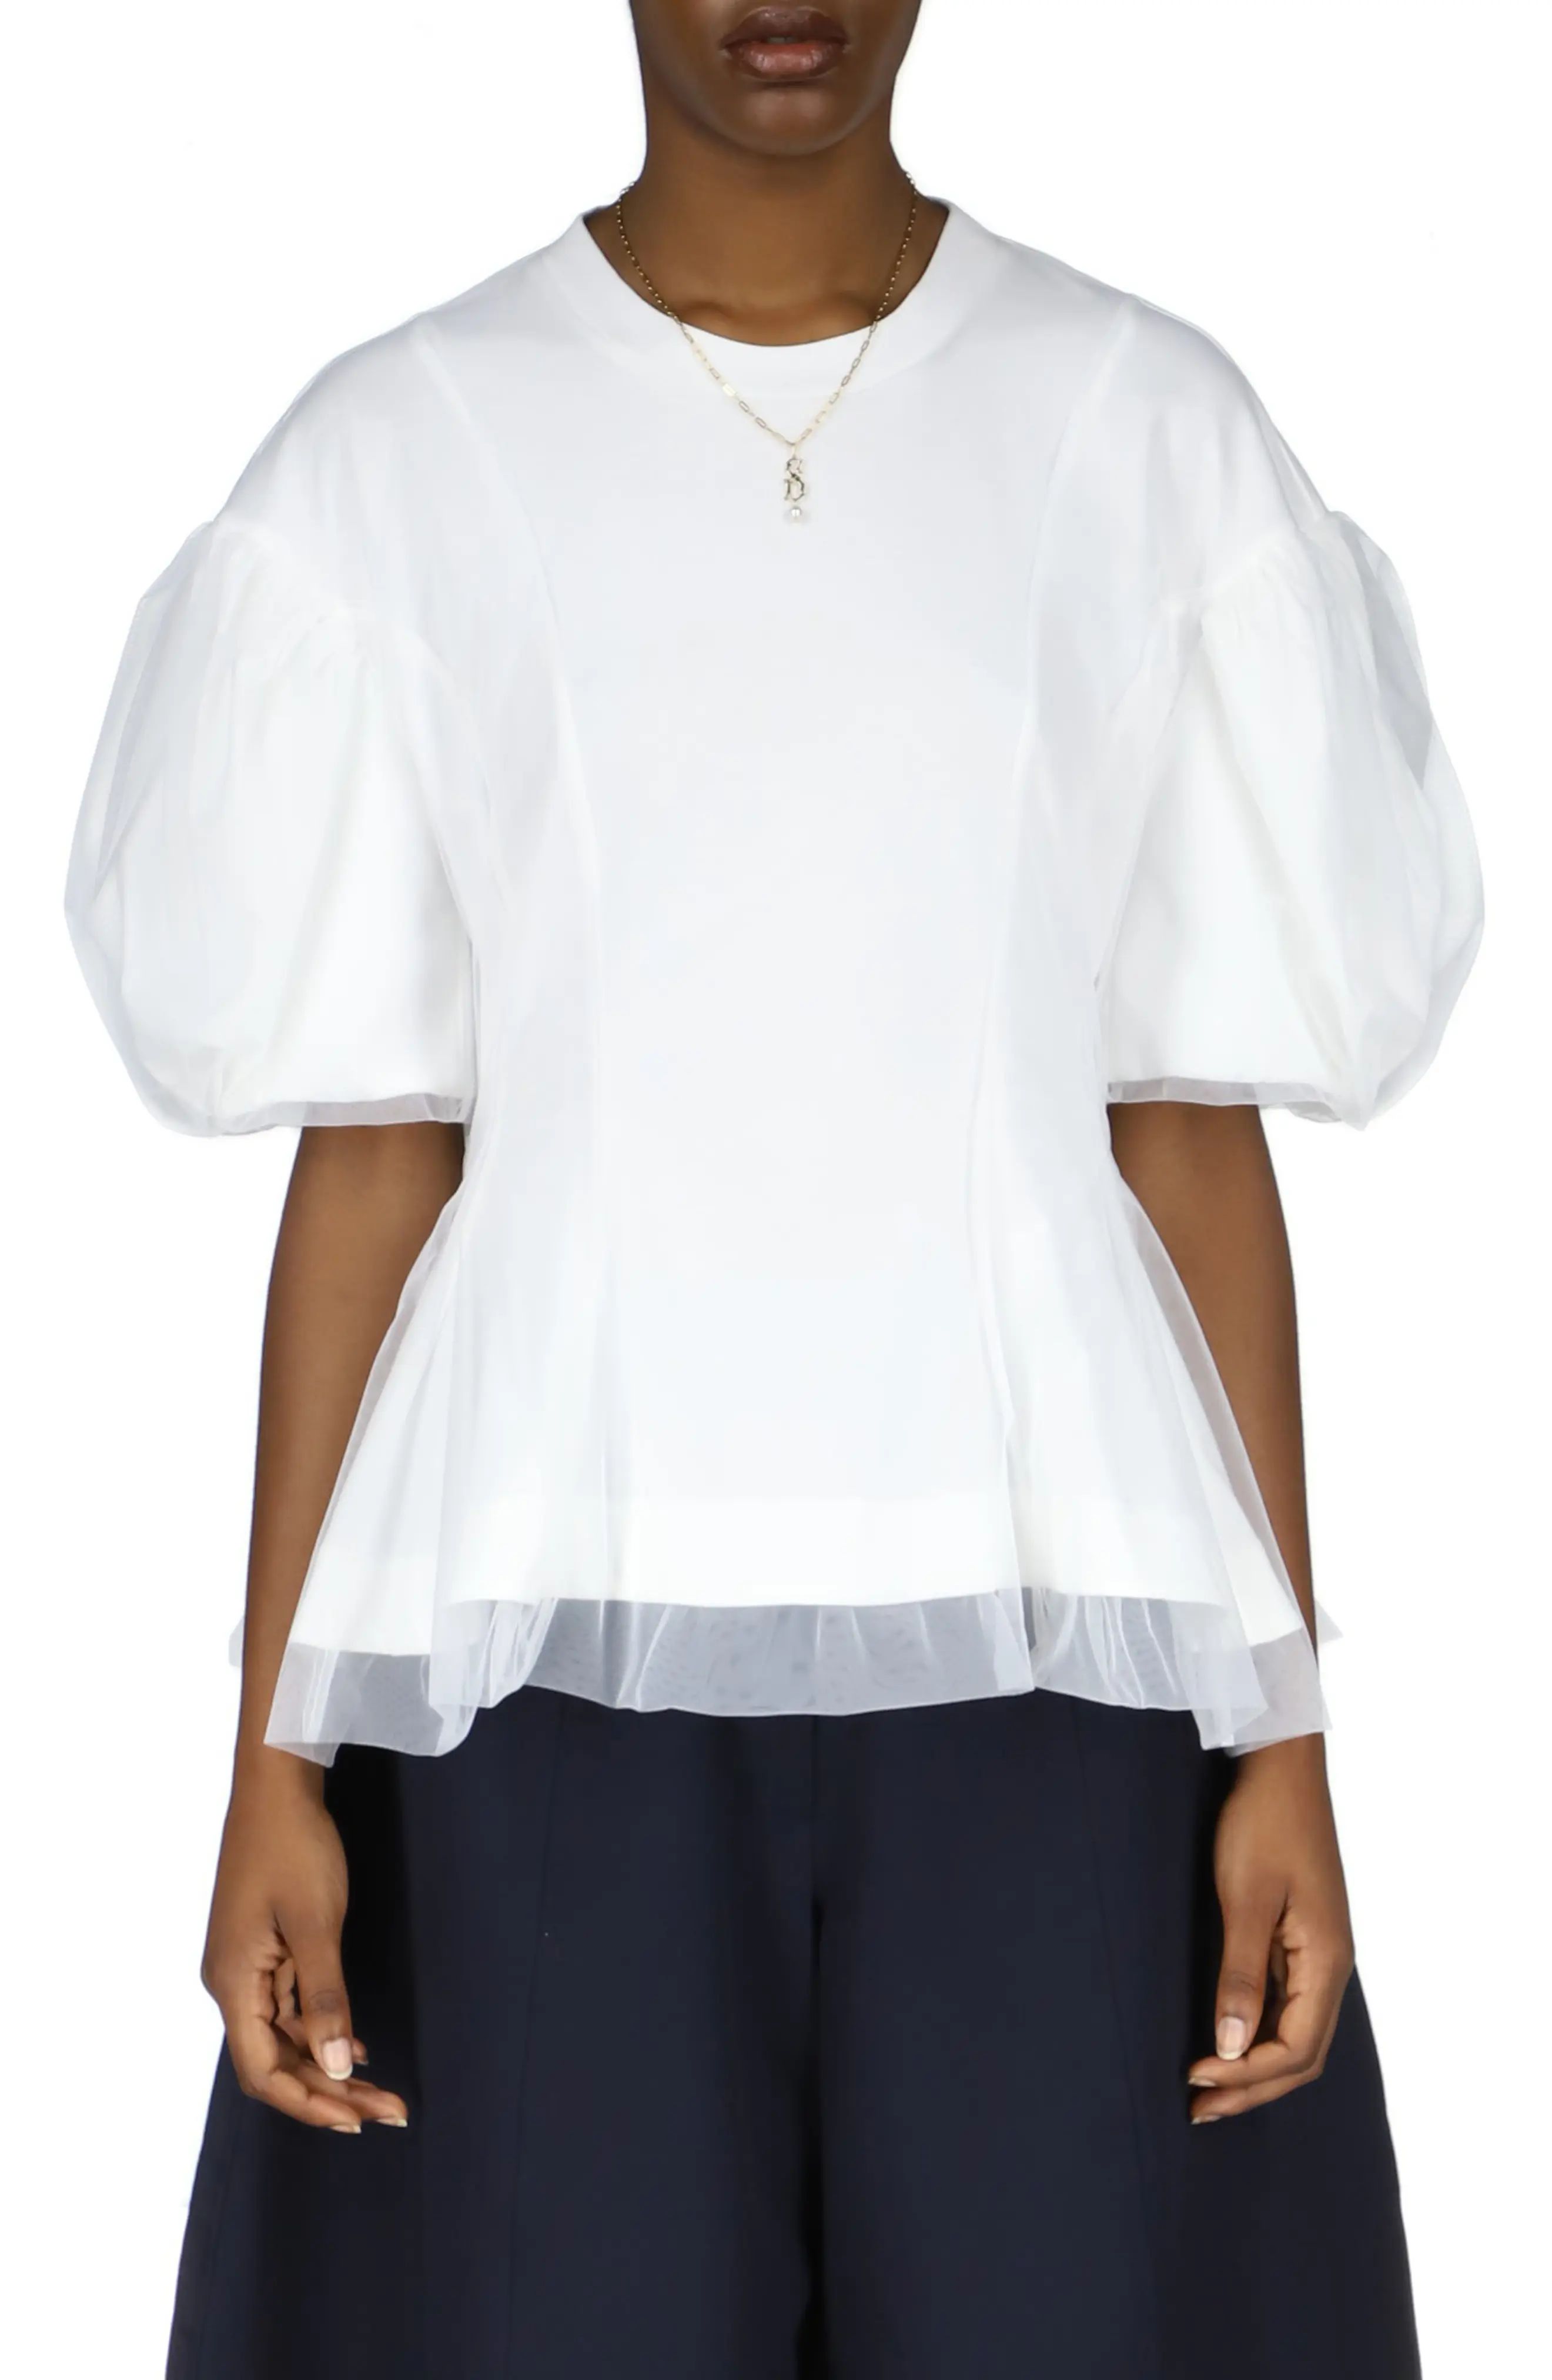 Women's Simone Rocha Tulle Overlay Sculpted Top, Size Large - White | Nordstrom